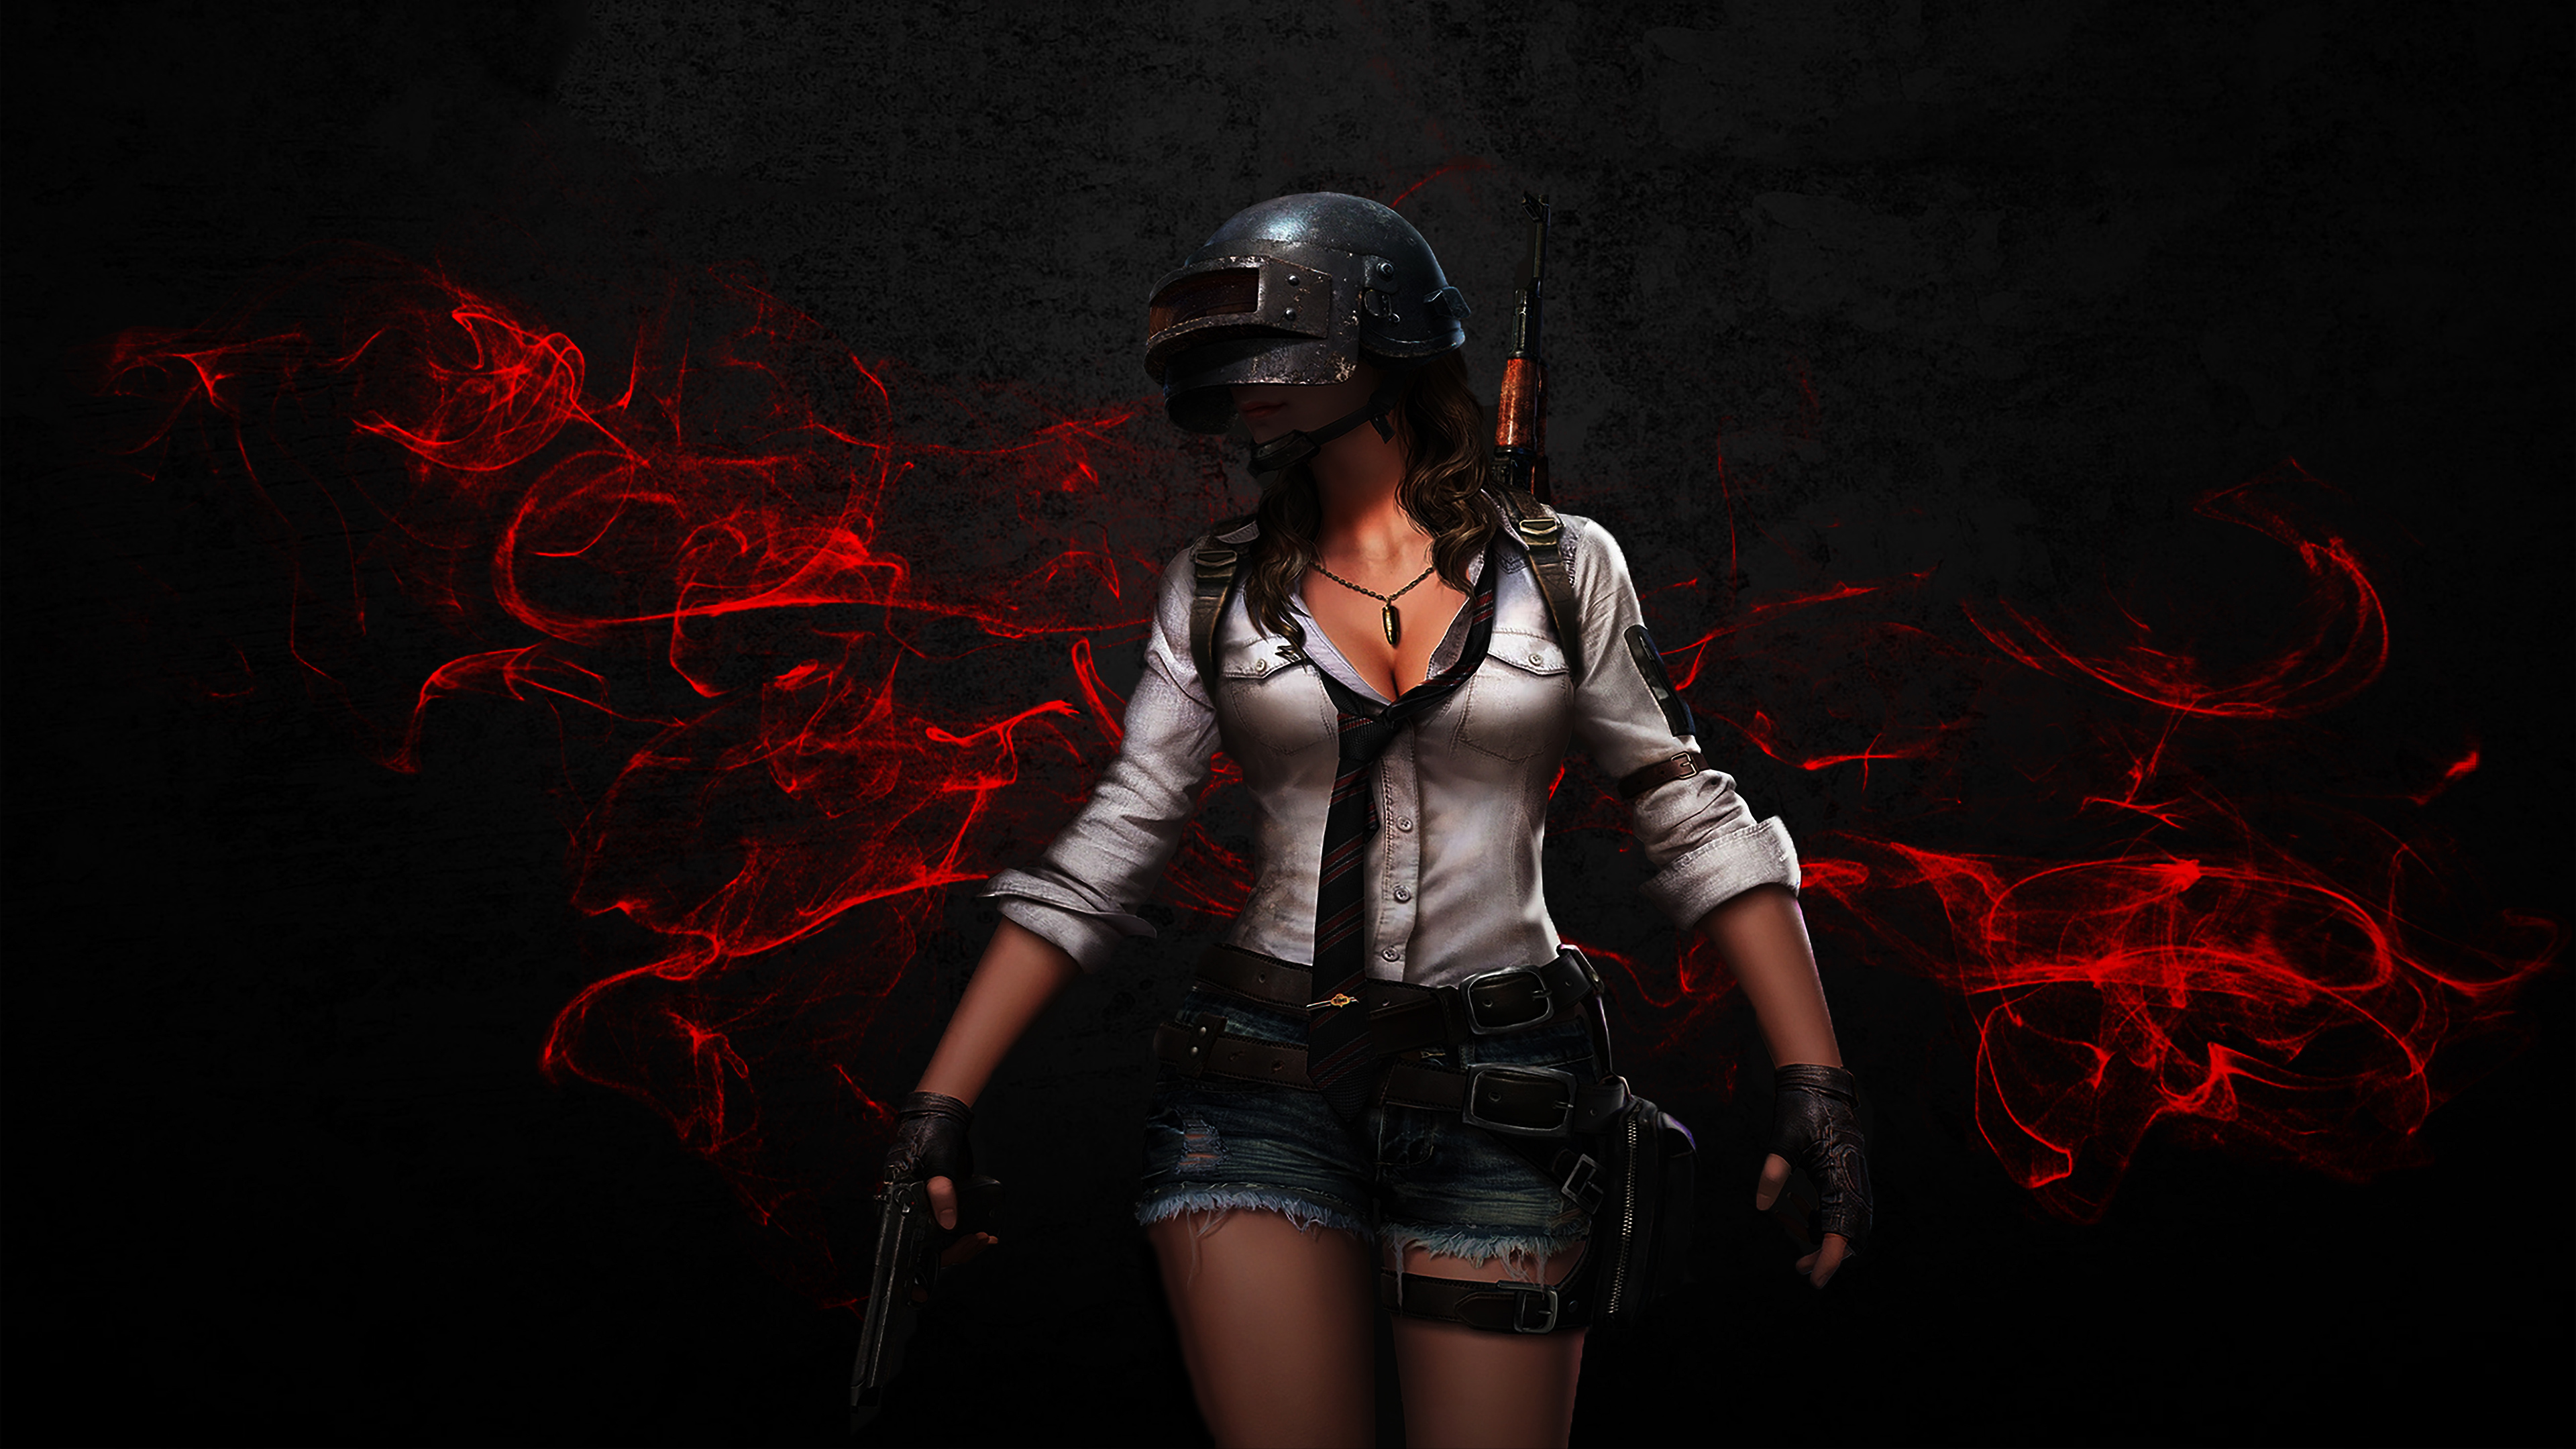 Pubg Helmet Girl Hd Games 4k Wallpapers Images Backgrounds Photos And Pictures